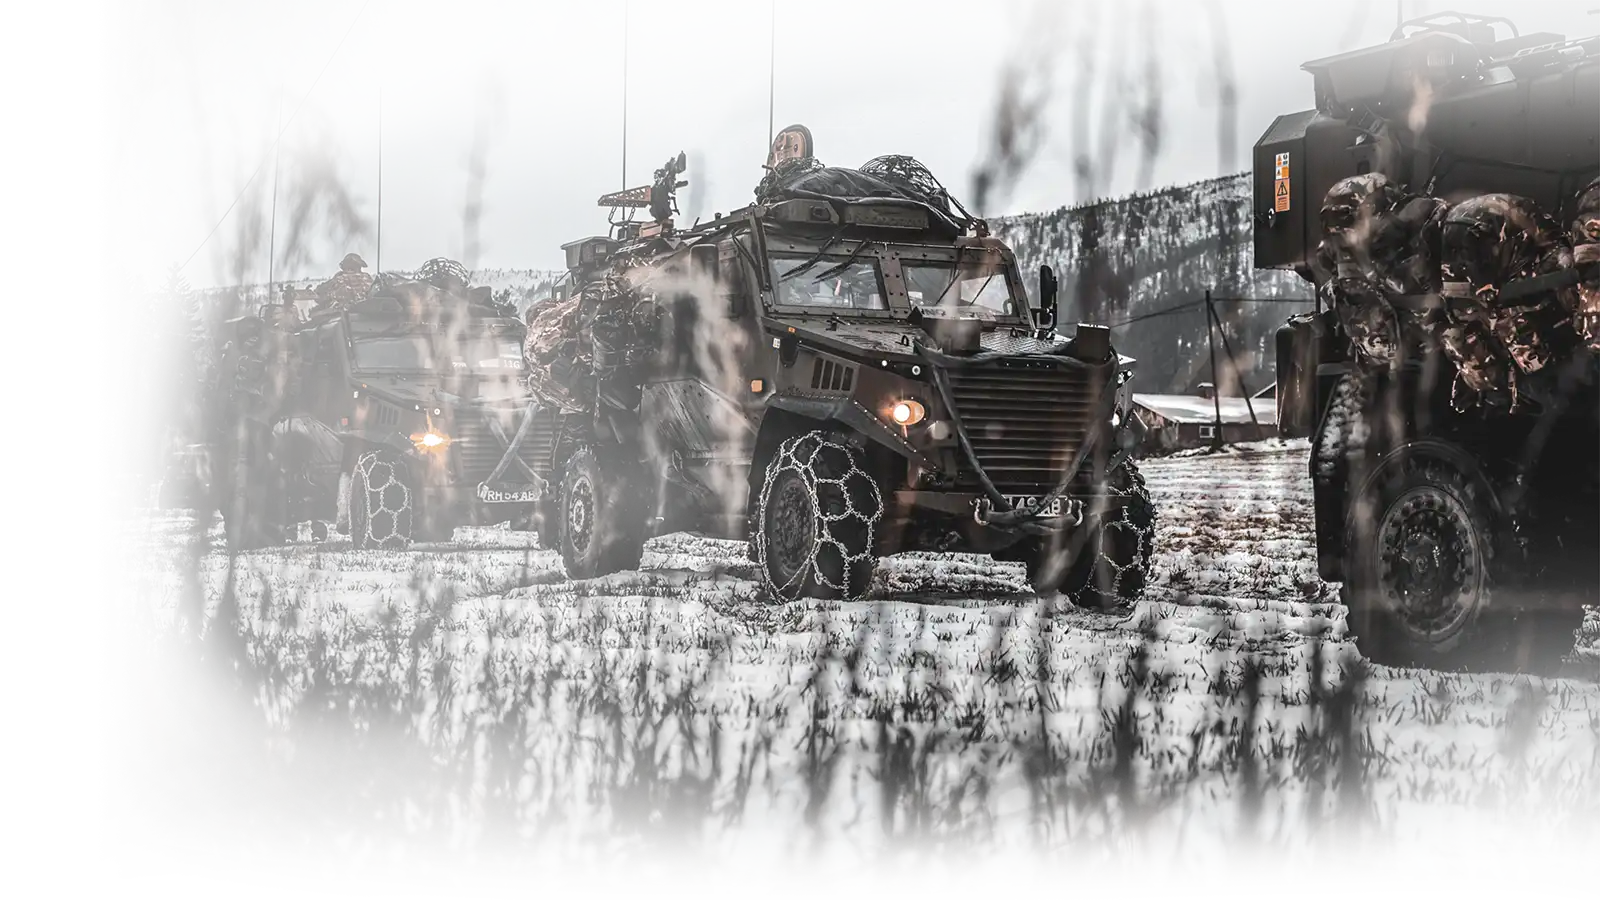 Military vehicles in snowy landscape RF power amplifiers